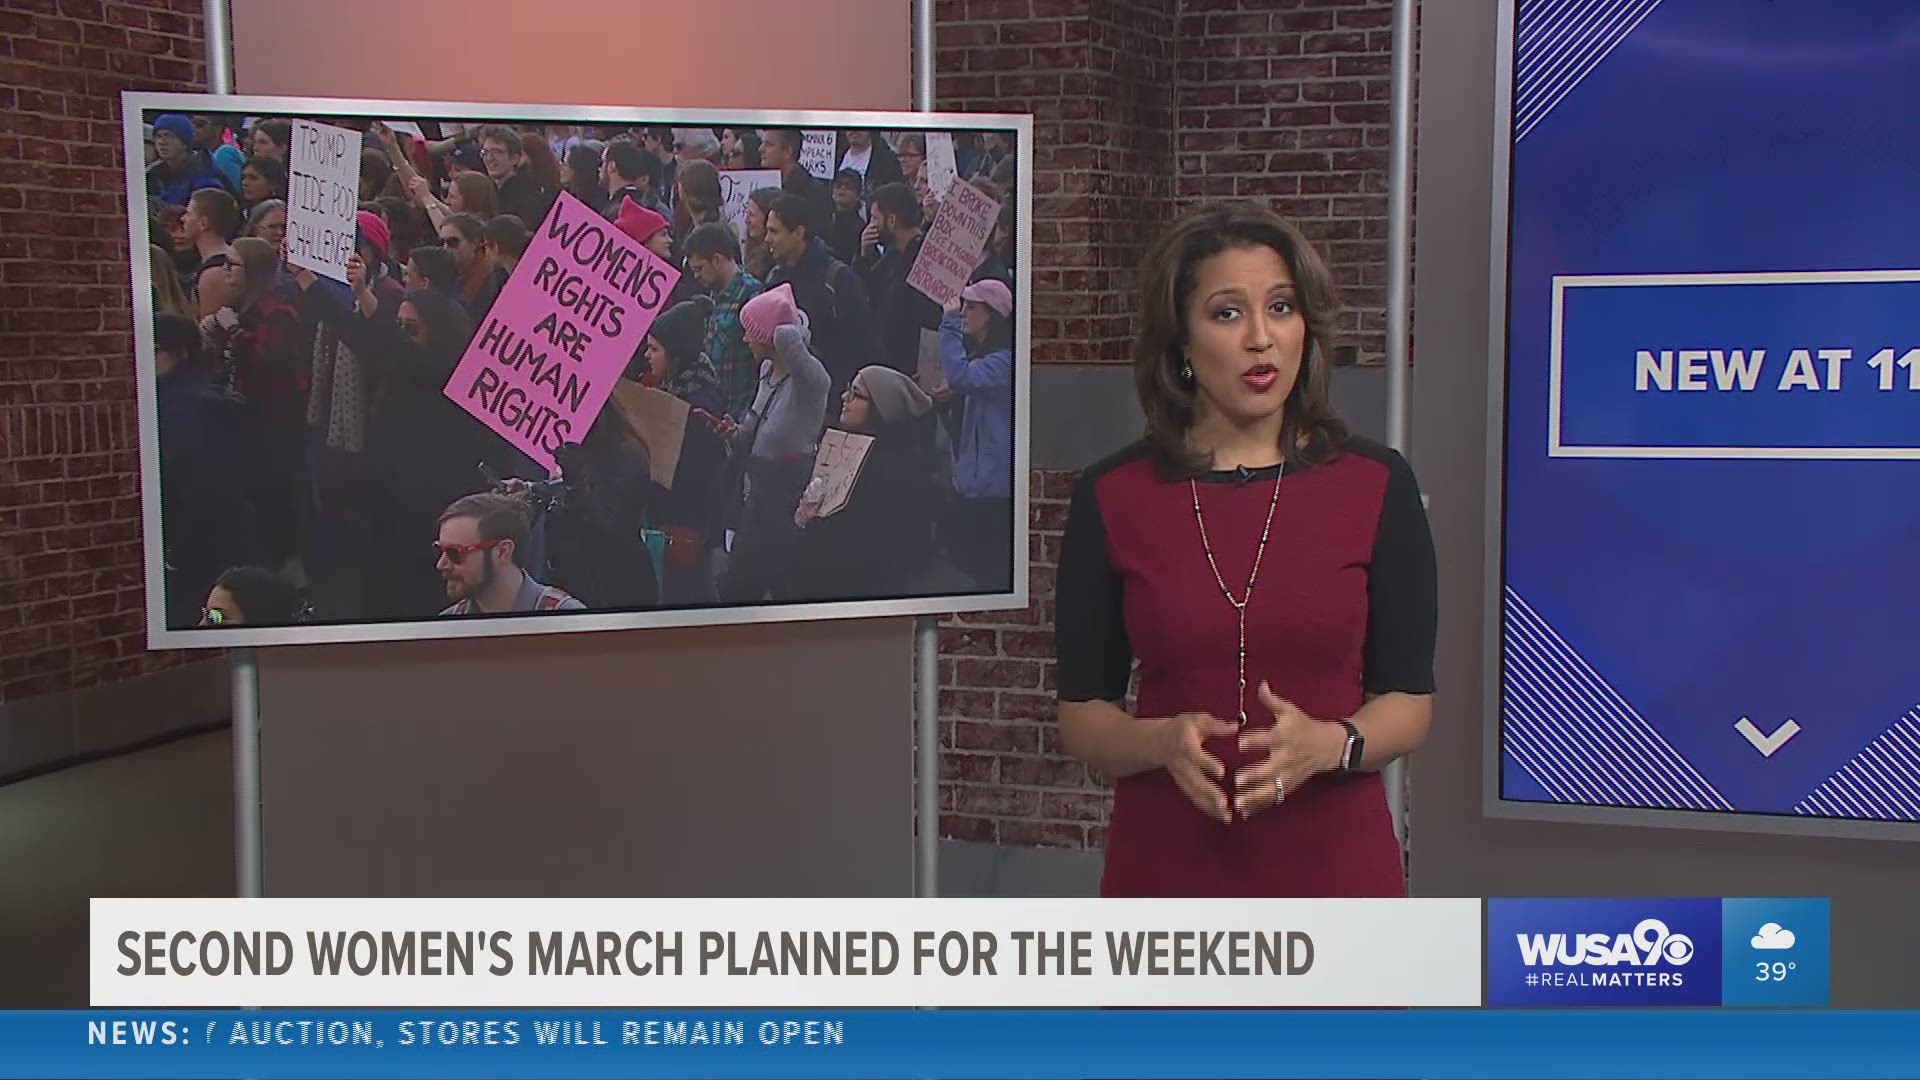 Not one, but two women's marches - because of growing controversy.